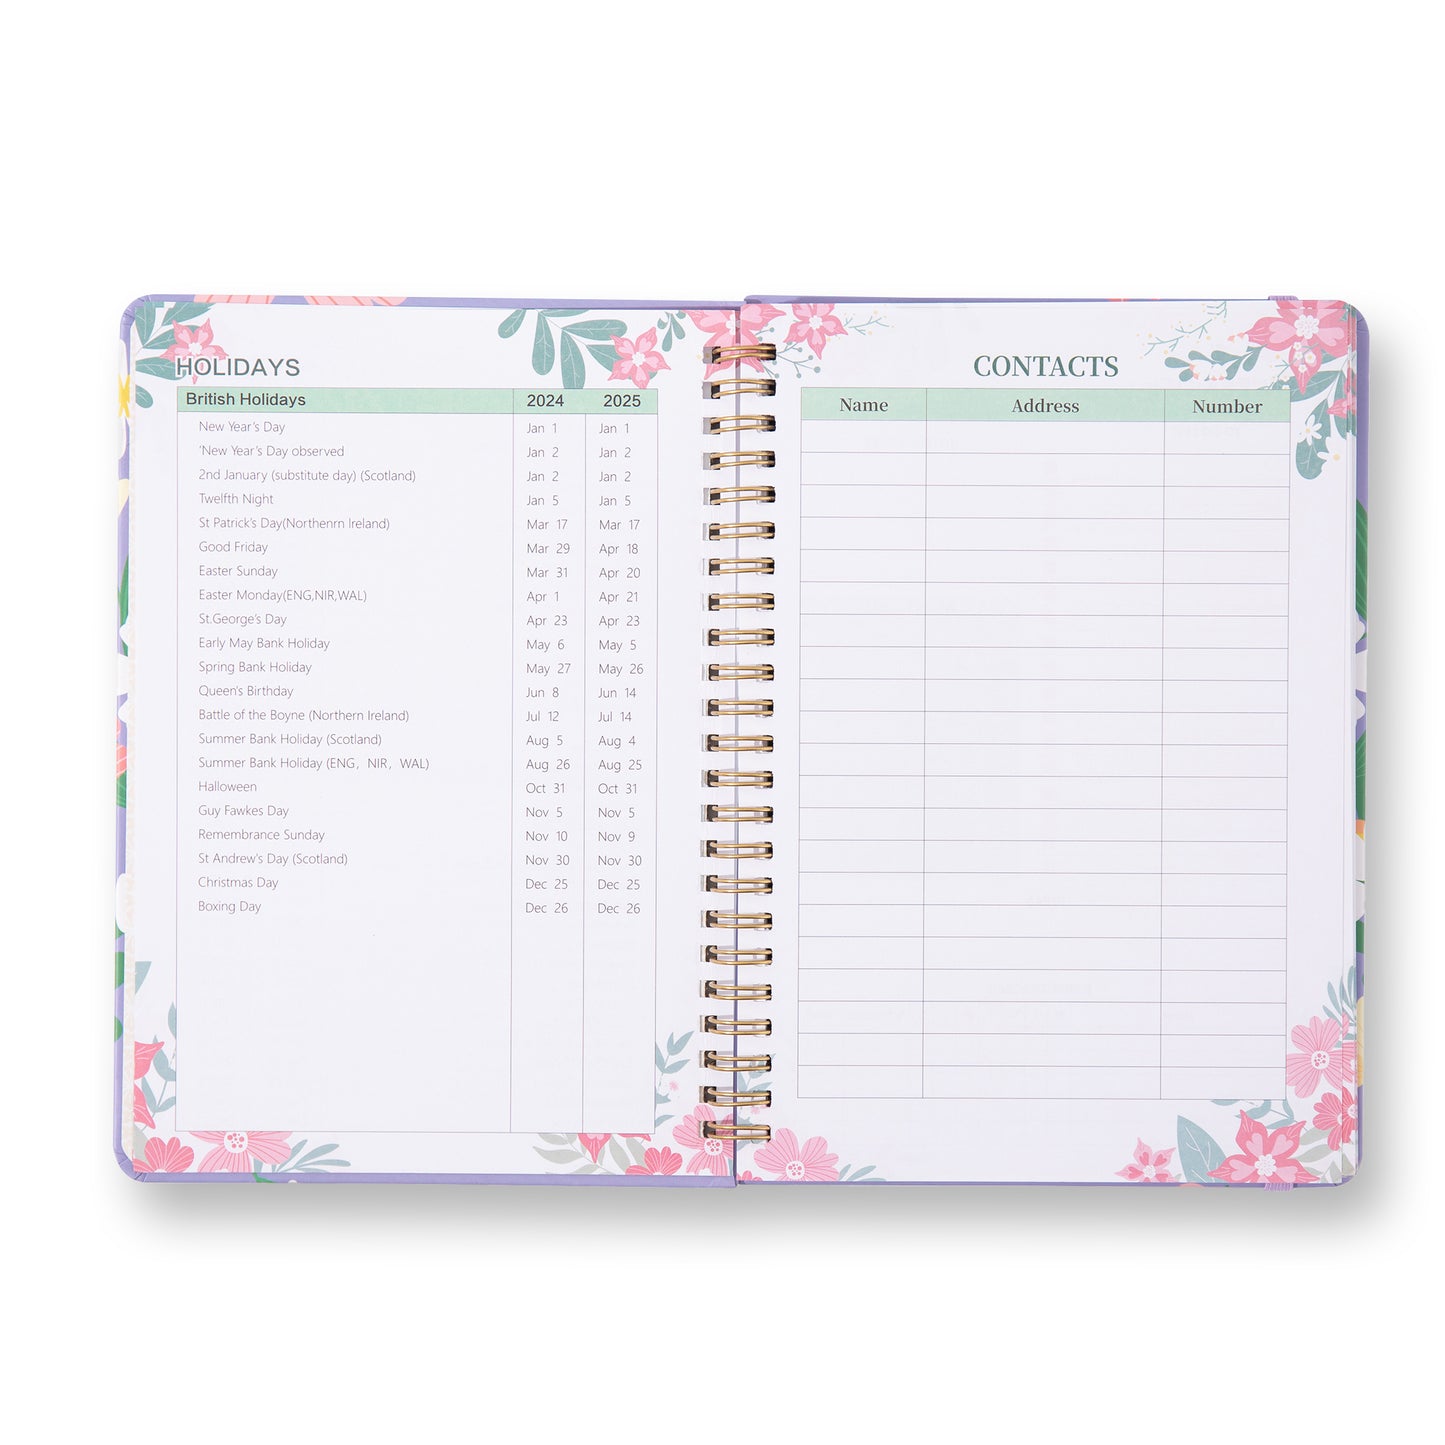 Blooming Flowers Spiral Daily Planner - A5 - Purple